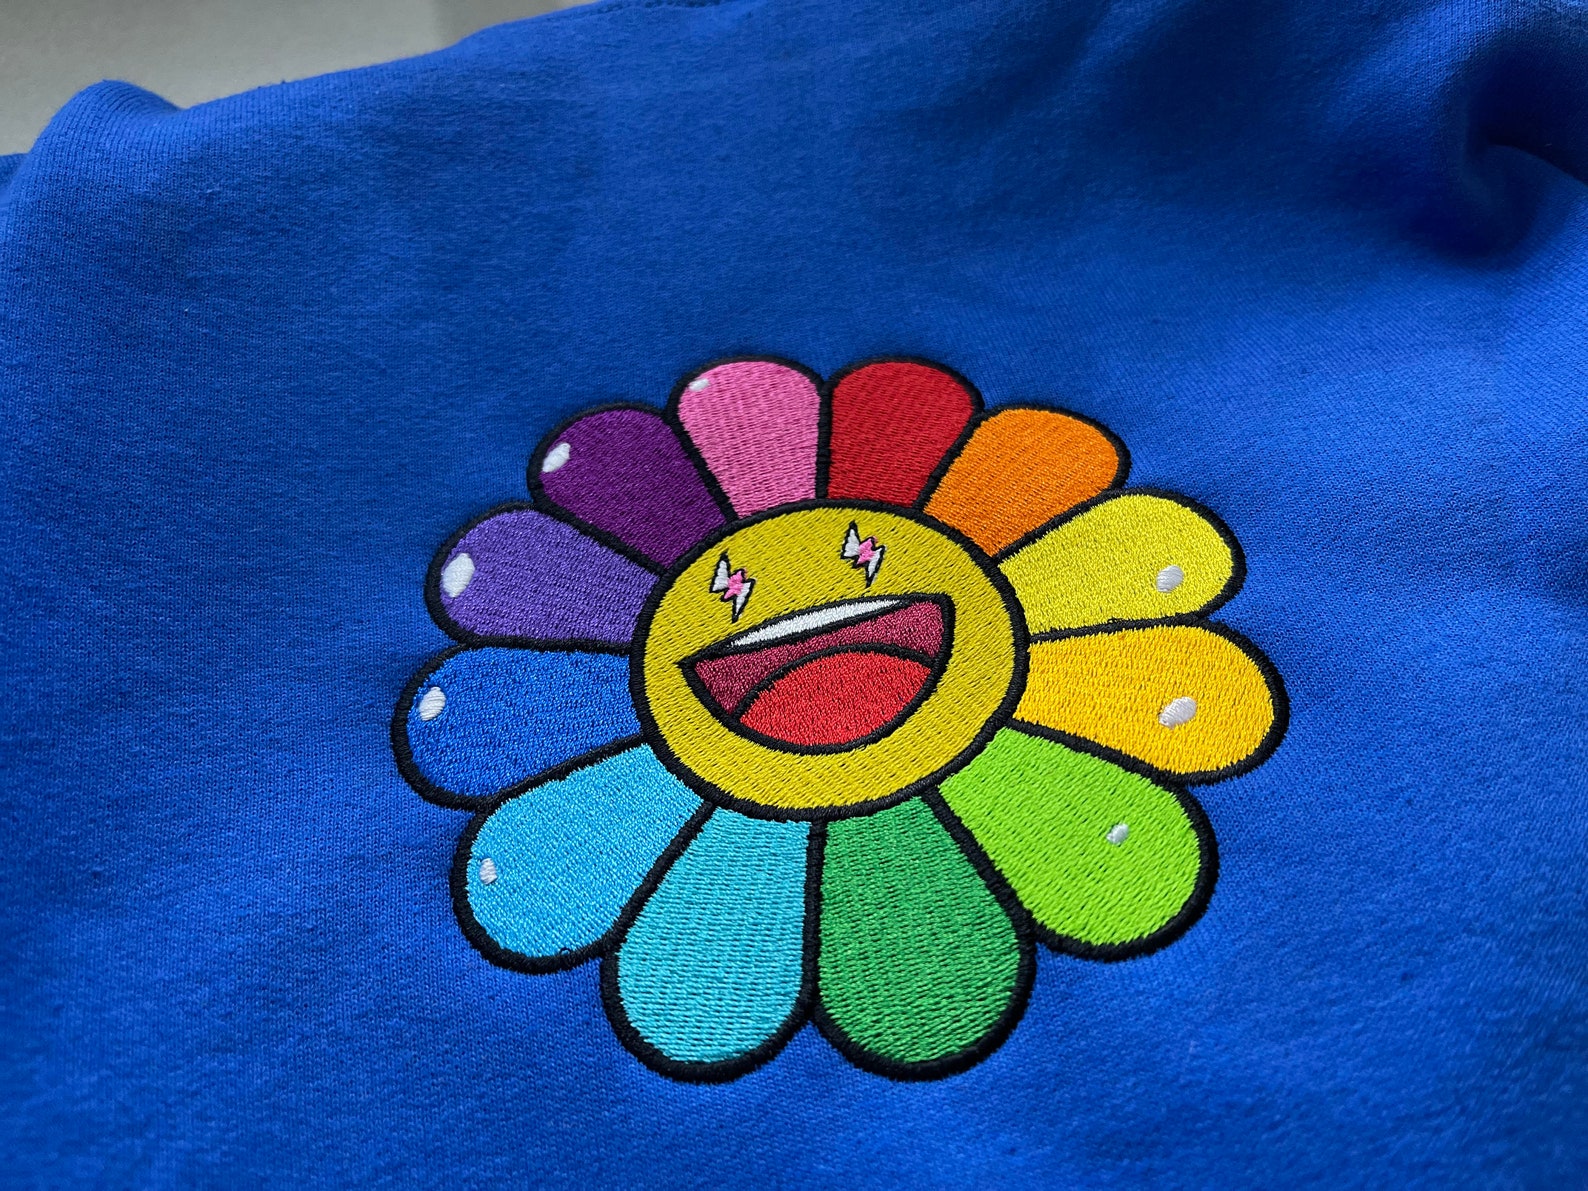 J Balvin Colores Flower Takashi Murakami File for Embroidery - Etsy